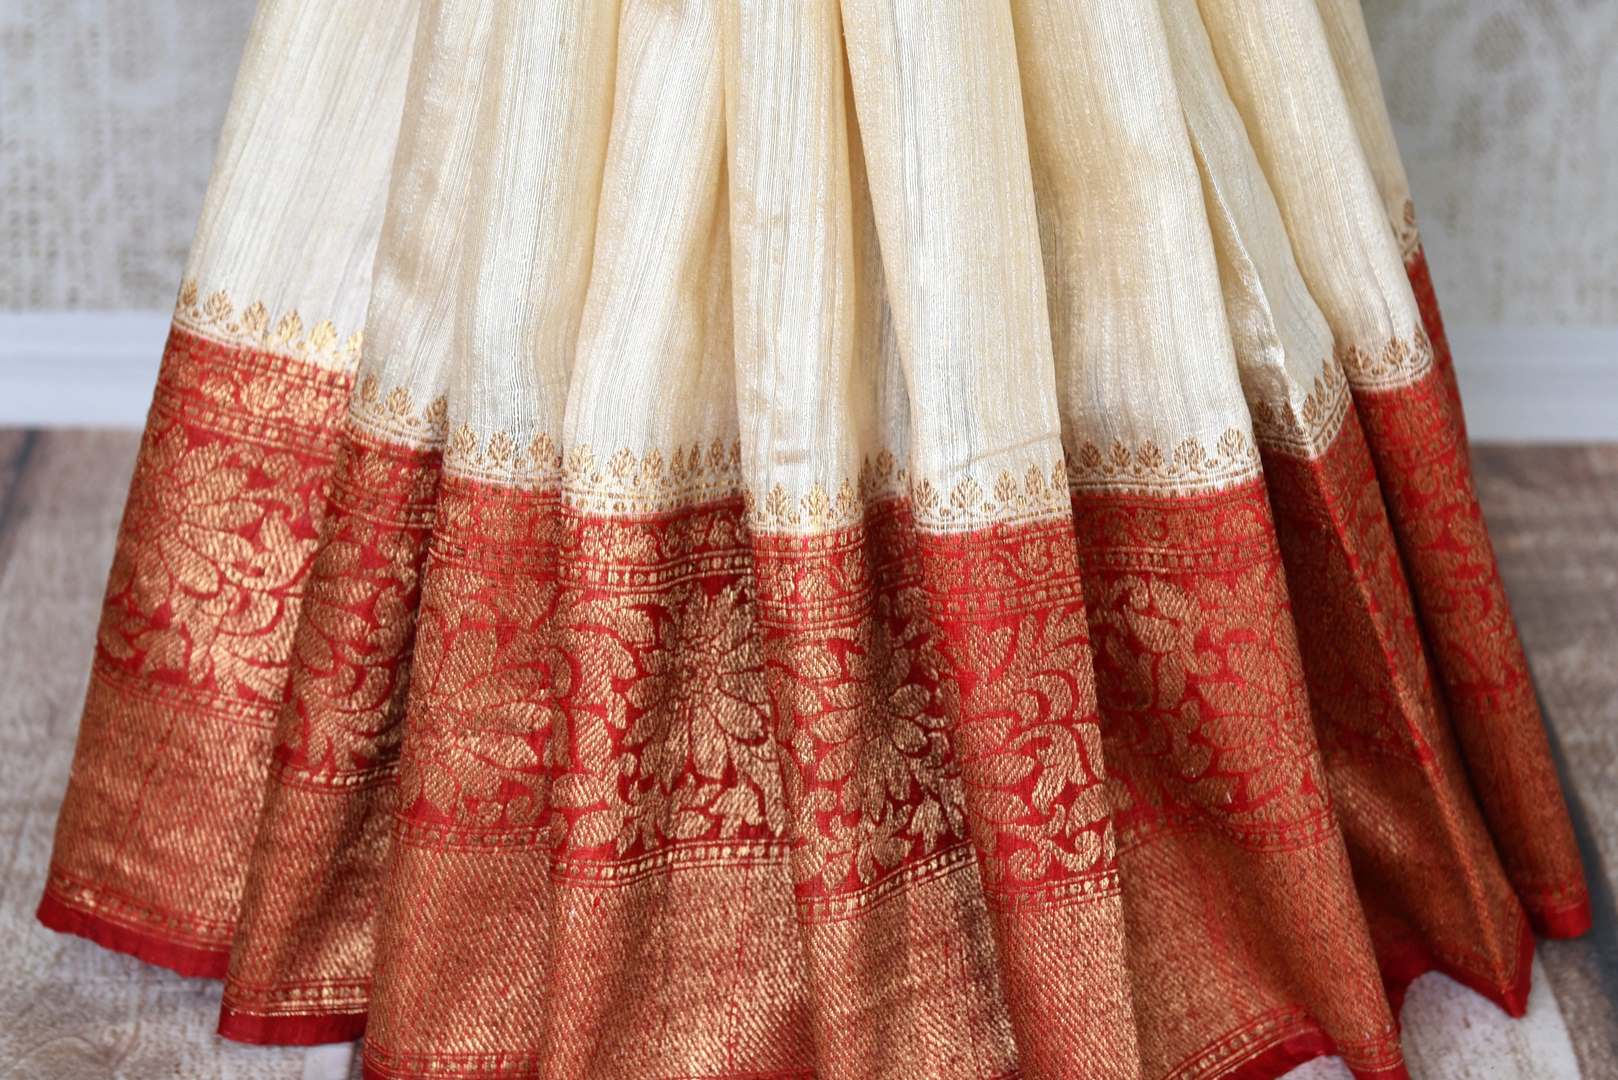 Fall in love with all things classic like this cream matka banarsi silk saree. The sensational combination of cream and red makes it even alluring. The red zari border and contrasting red blouse enhance the beauty. Shop designer silk saree, ikkat sari, georgette saree online or visit Pure Elegance store, USA.-pleats